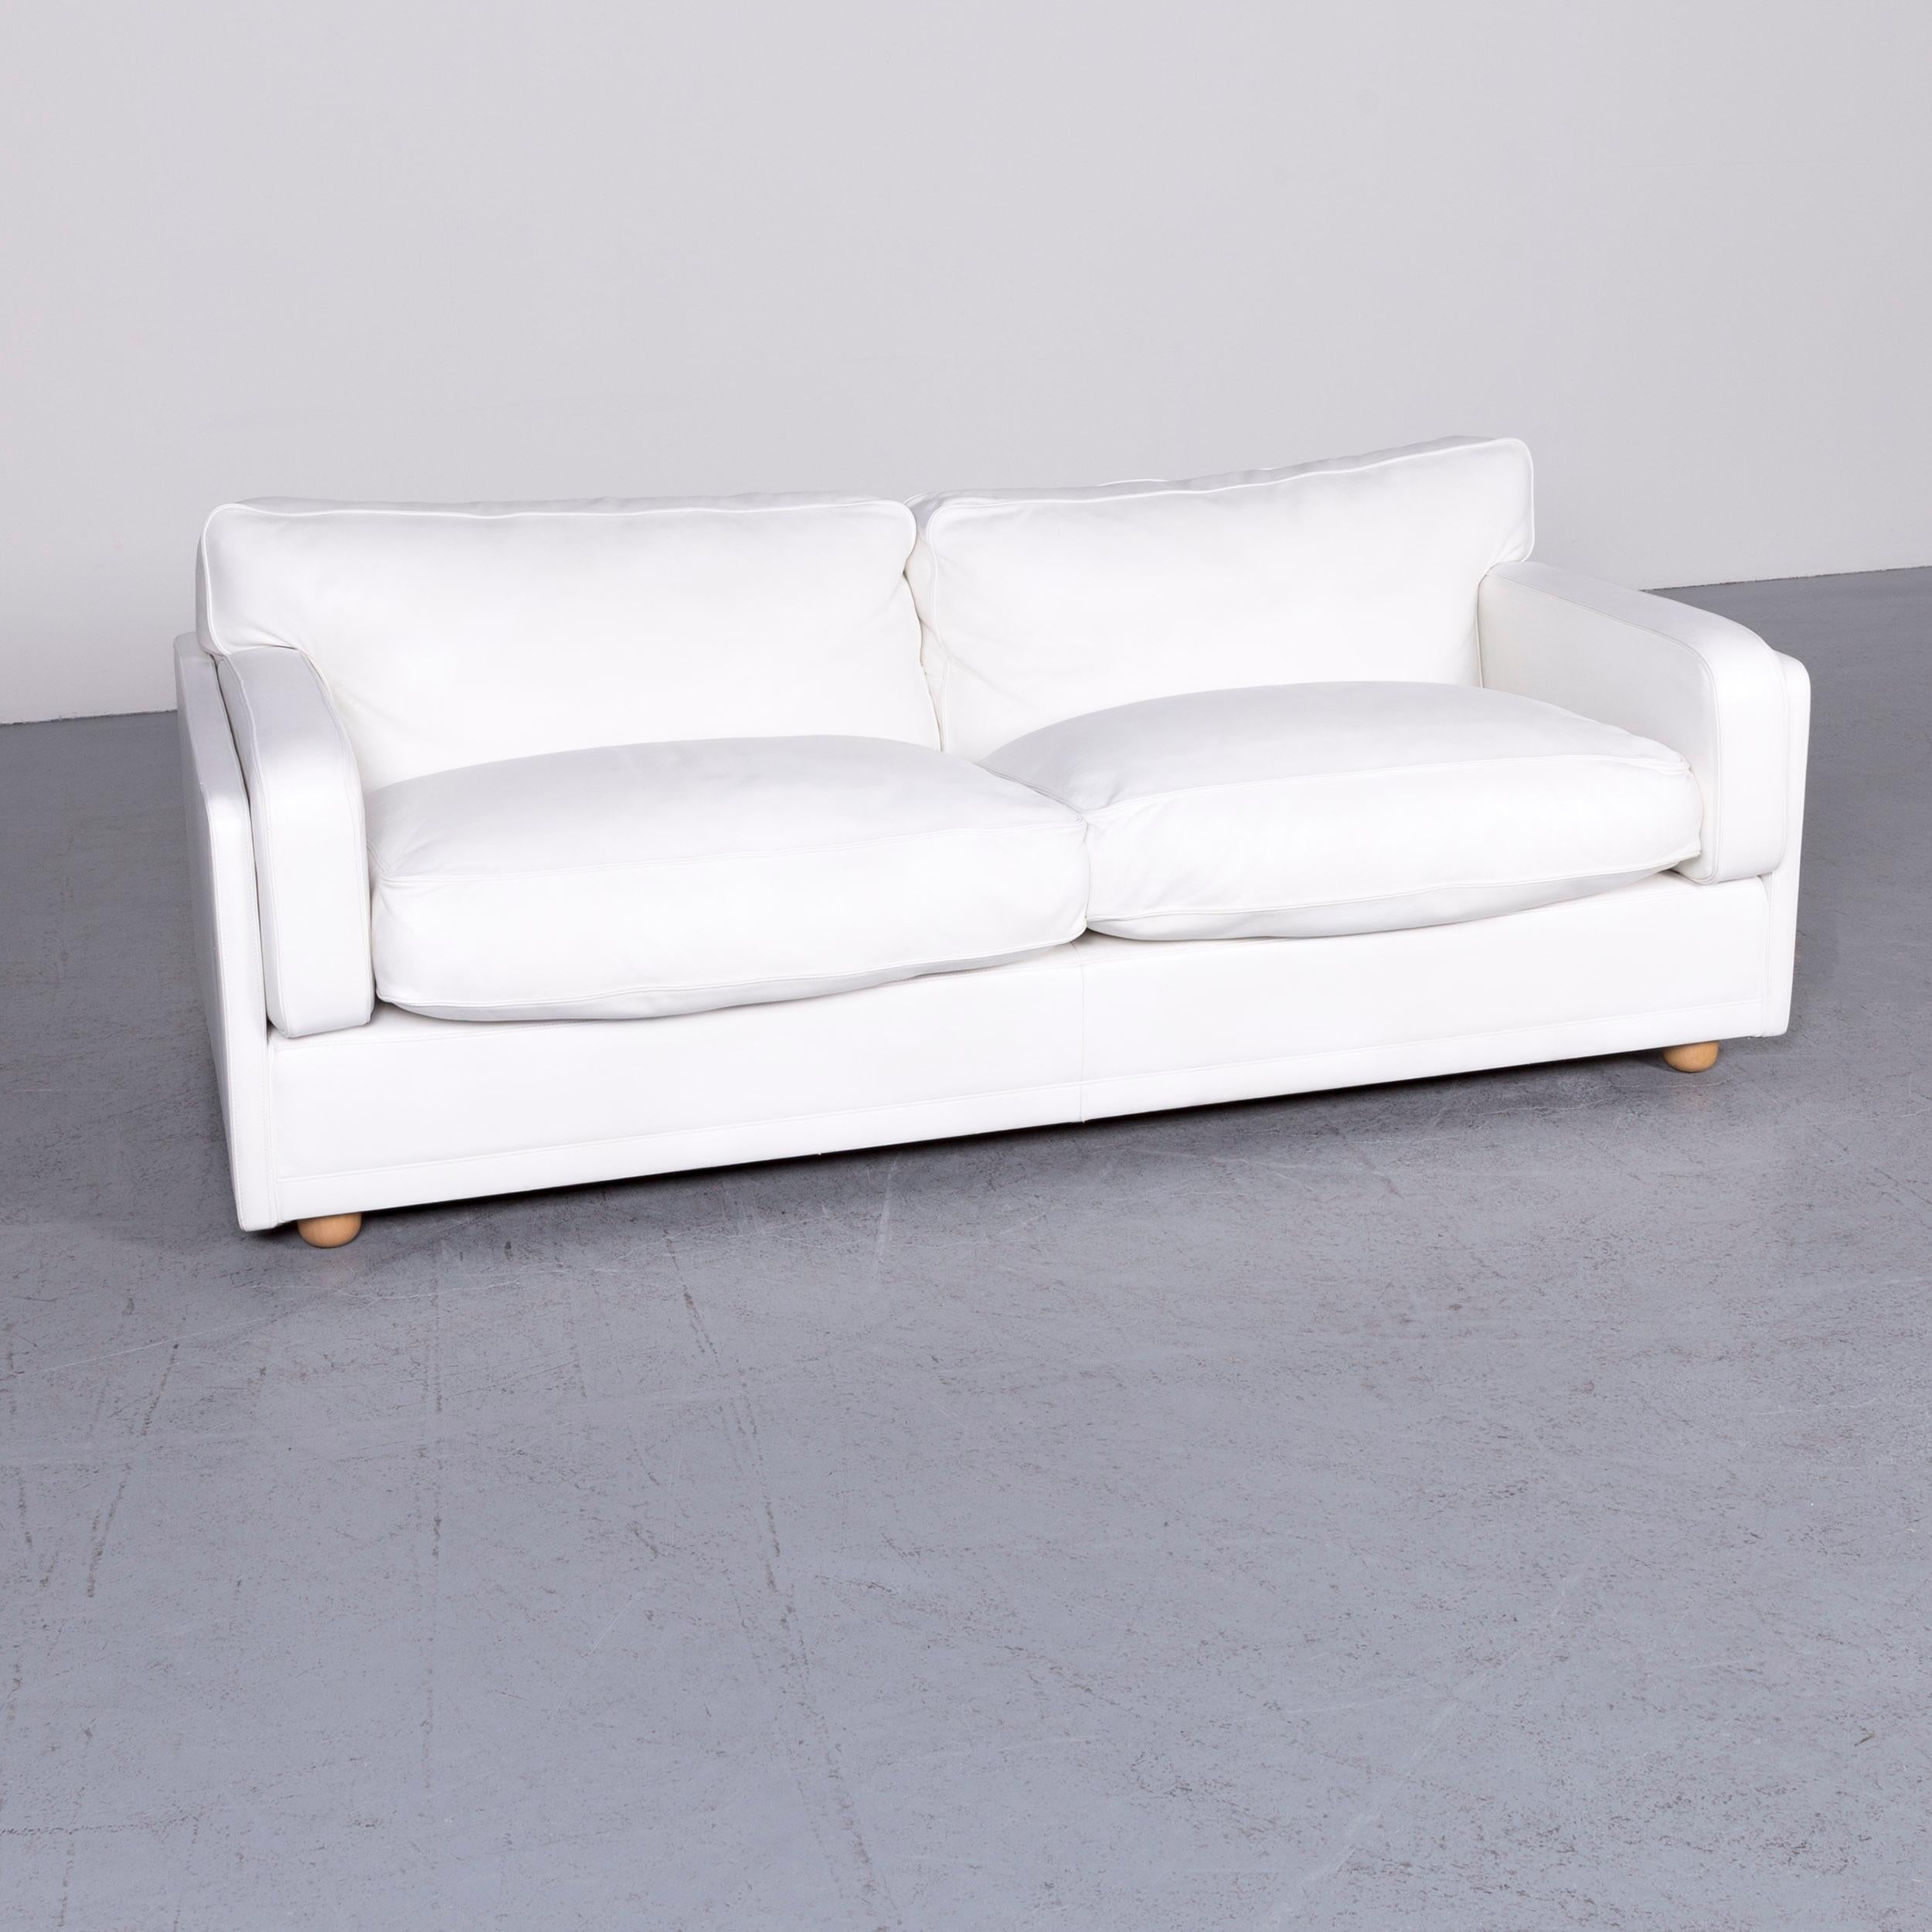 We bring to you a Poltrona Frau Socrate designer leather sofa white three-seat couch.